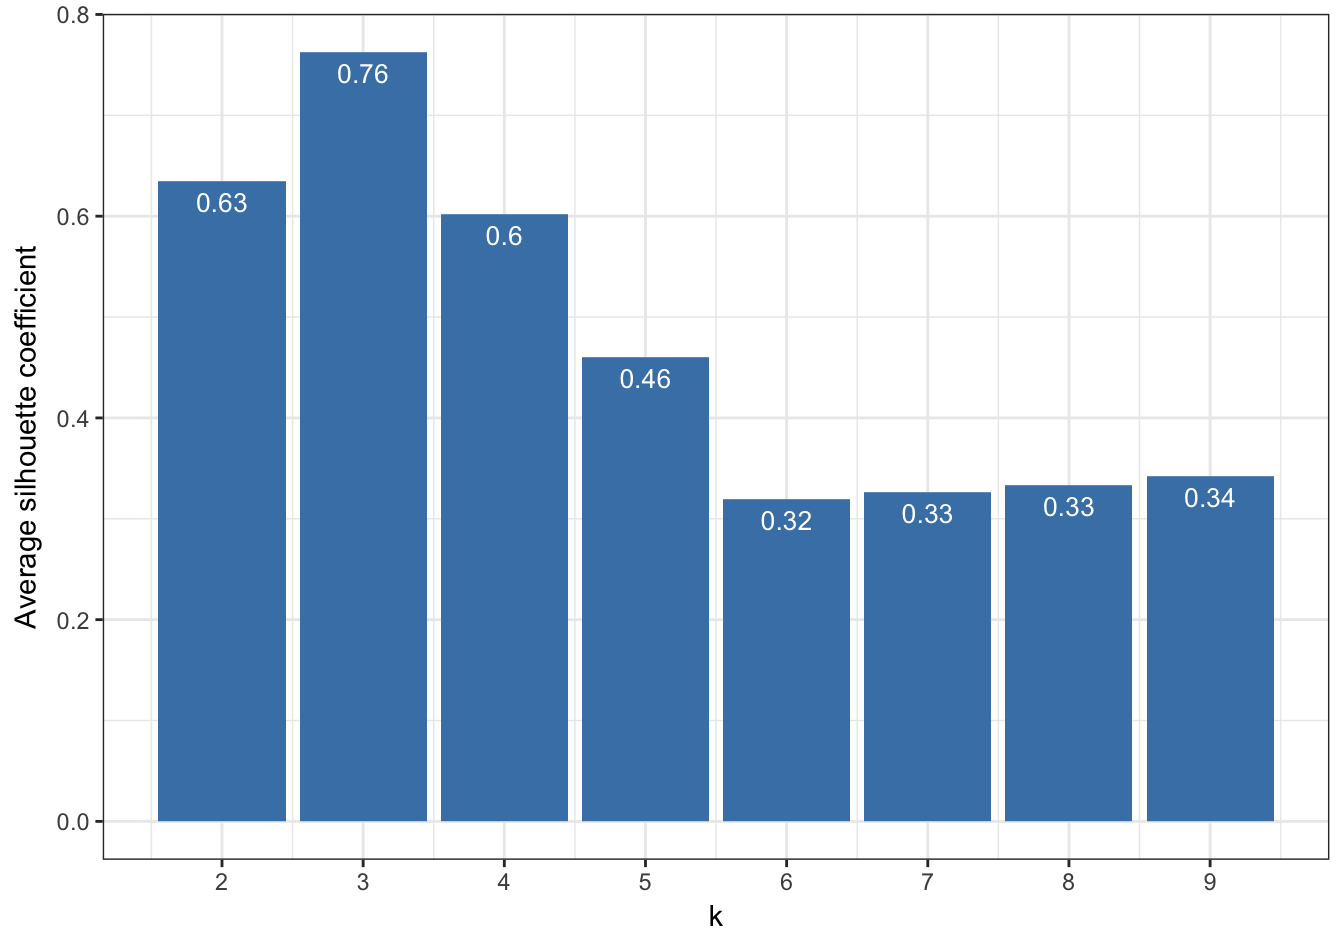 Barplot of the average silhouette coefficients resulting from k-means clustering of the blobs data-set using values of k from 1-9.